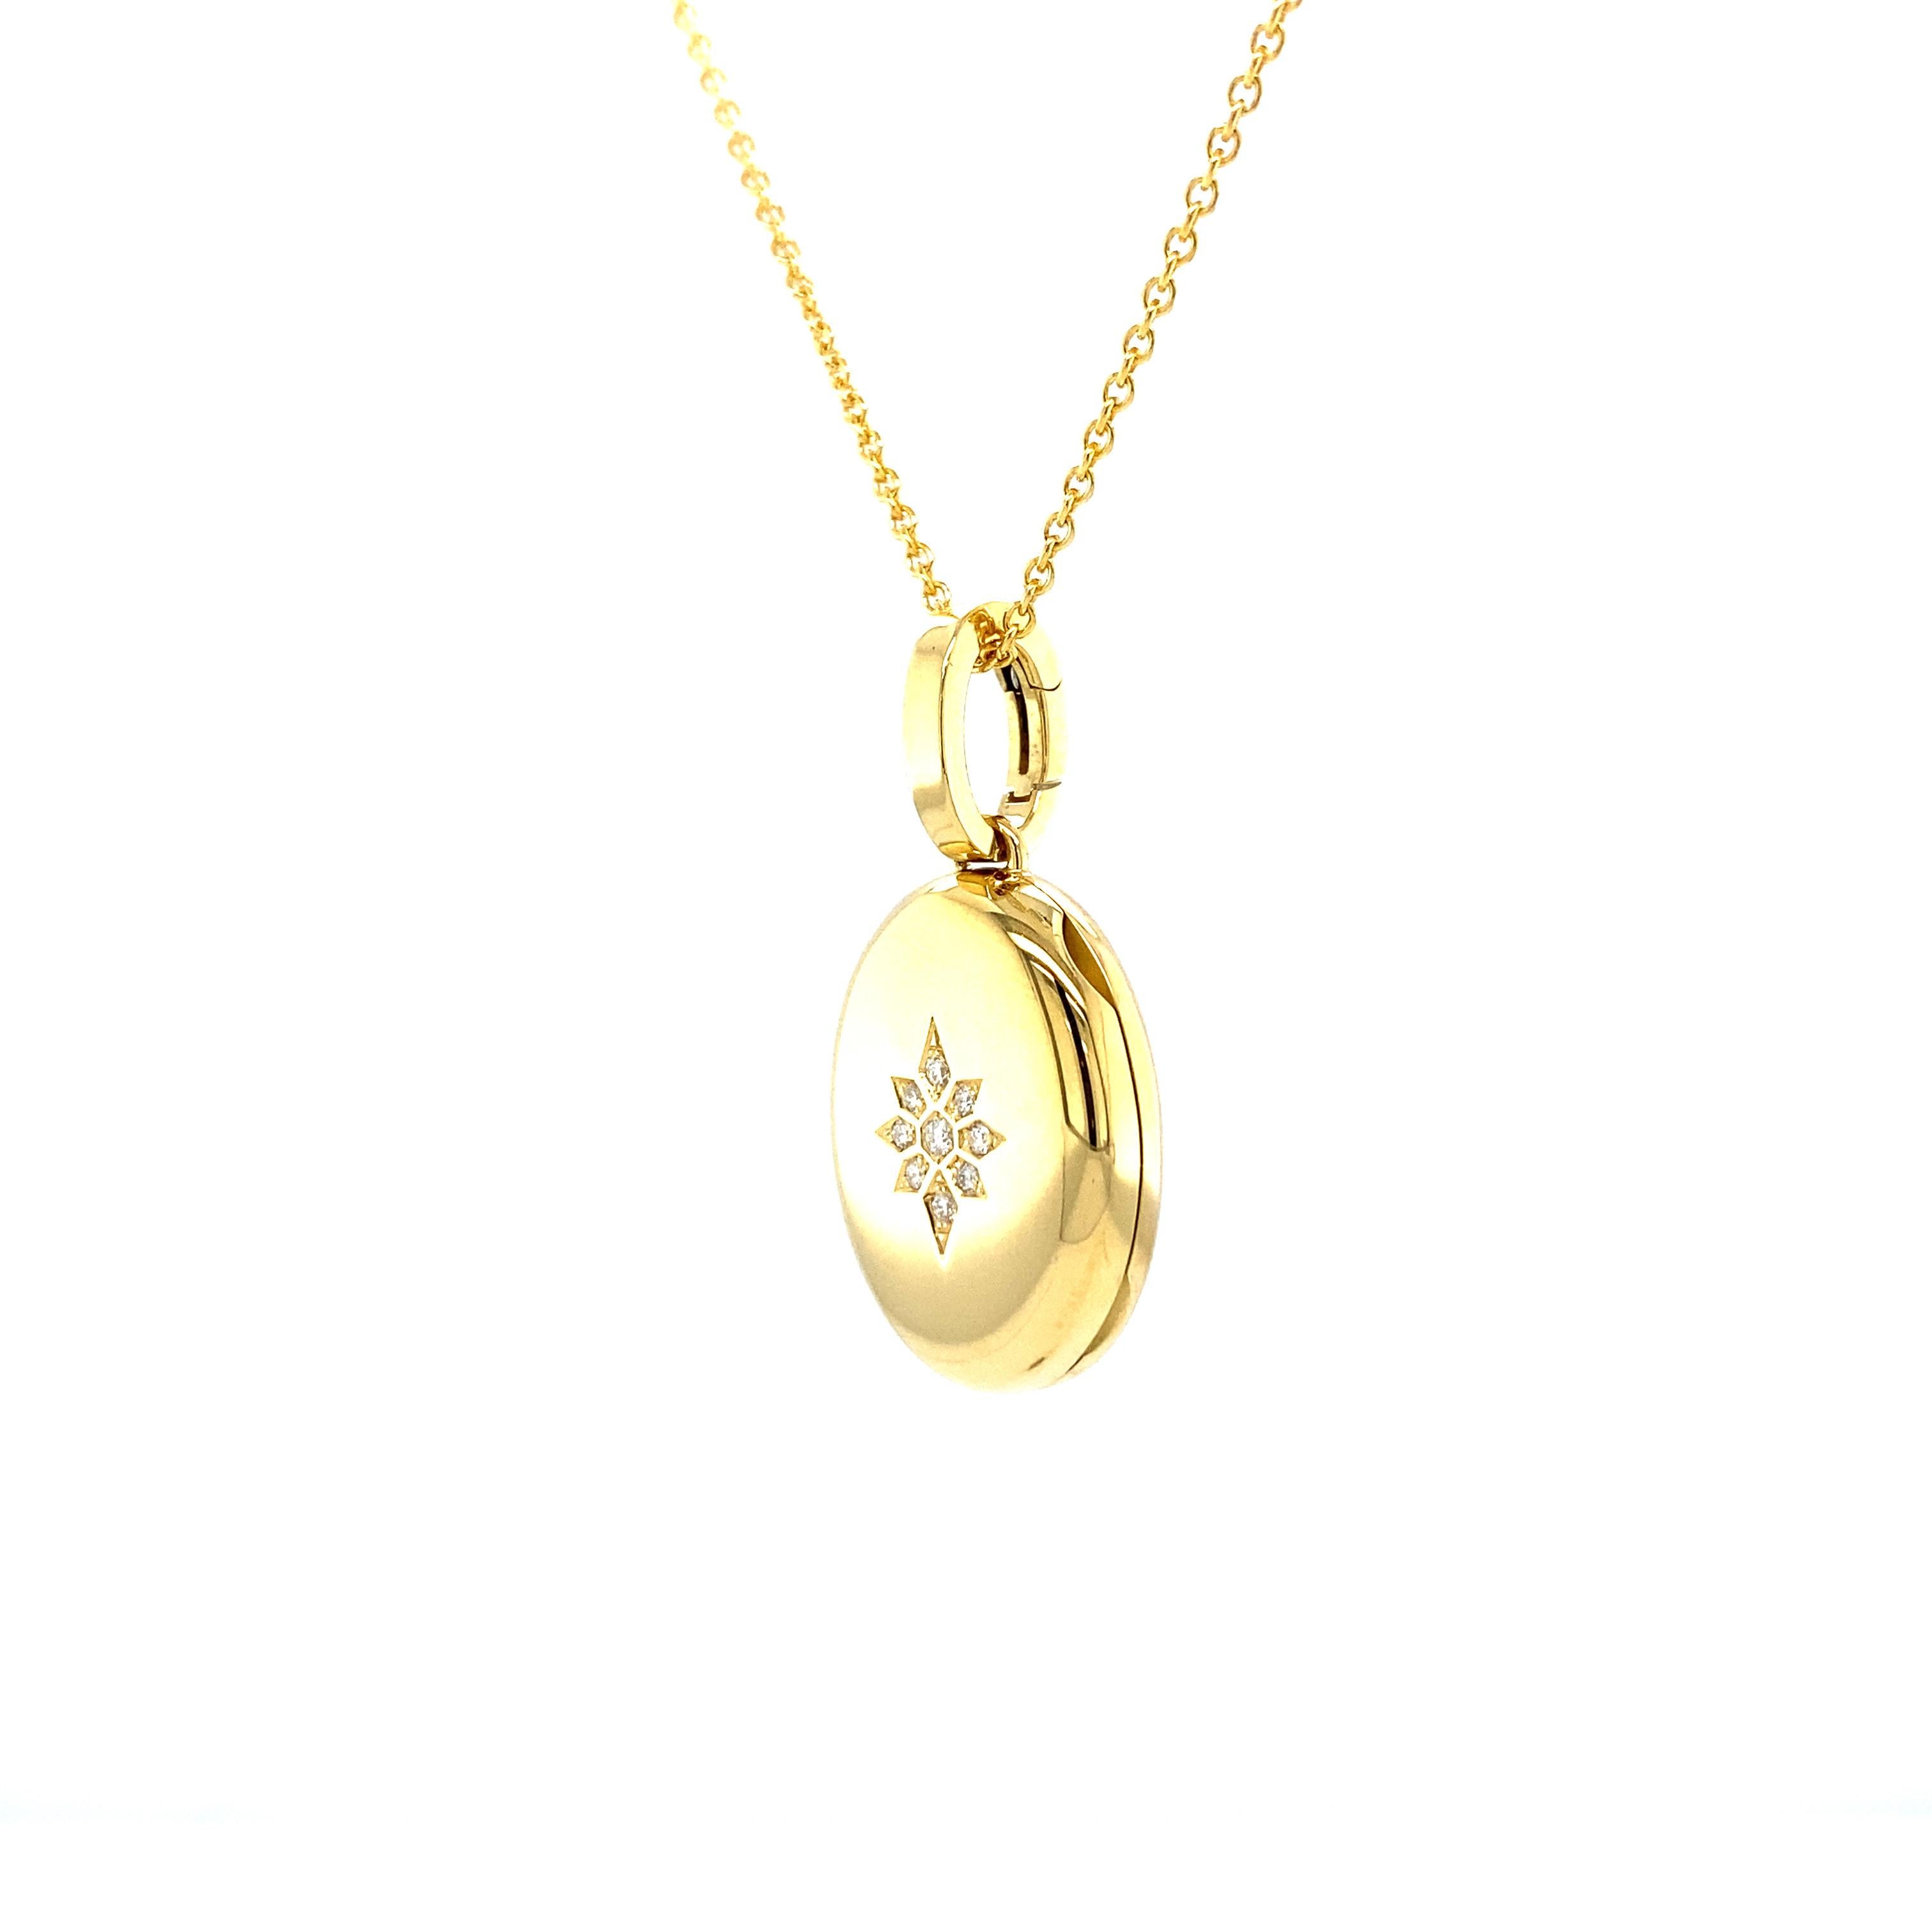 Heavy Oval Locket Pendant 18k Yellow Gold Star Motif with 9 Diamonds total 0.07 For Sale 2